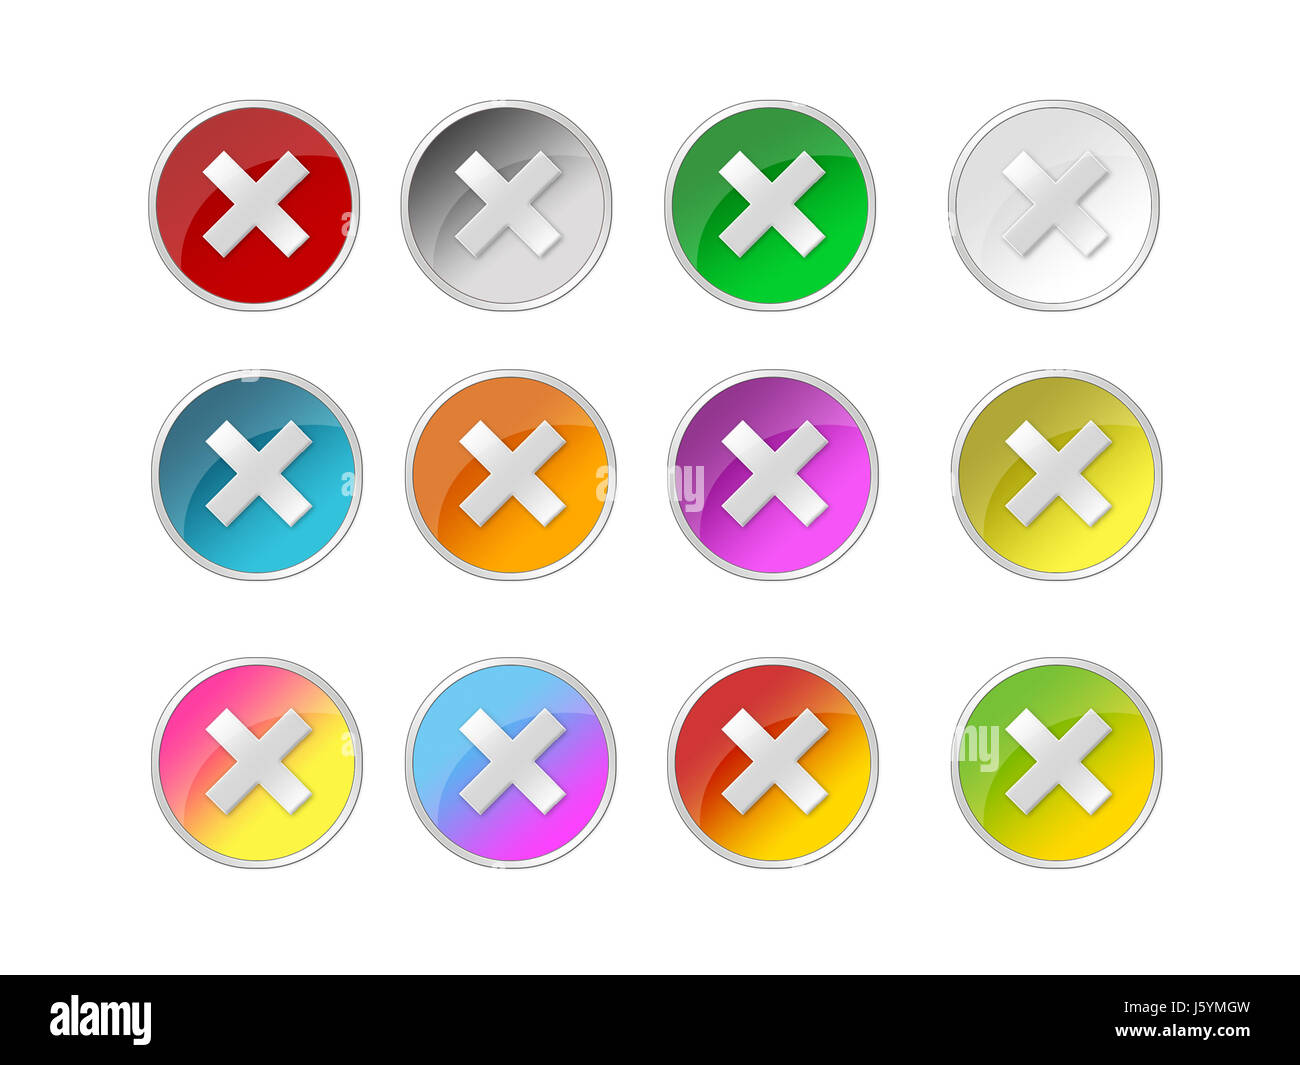 graphic glossy icons conspicuous pictographic transparent buttons keys design Stock Photo